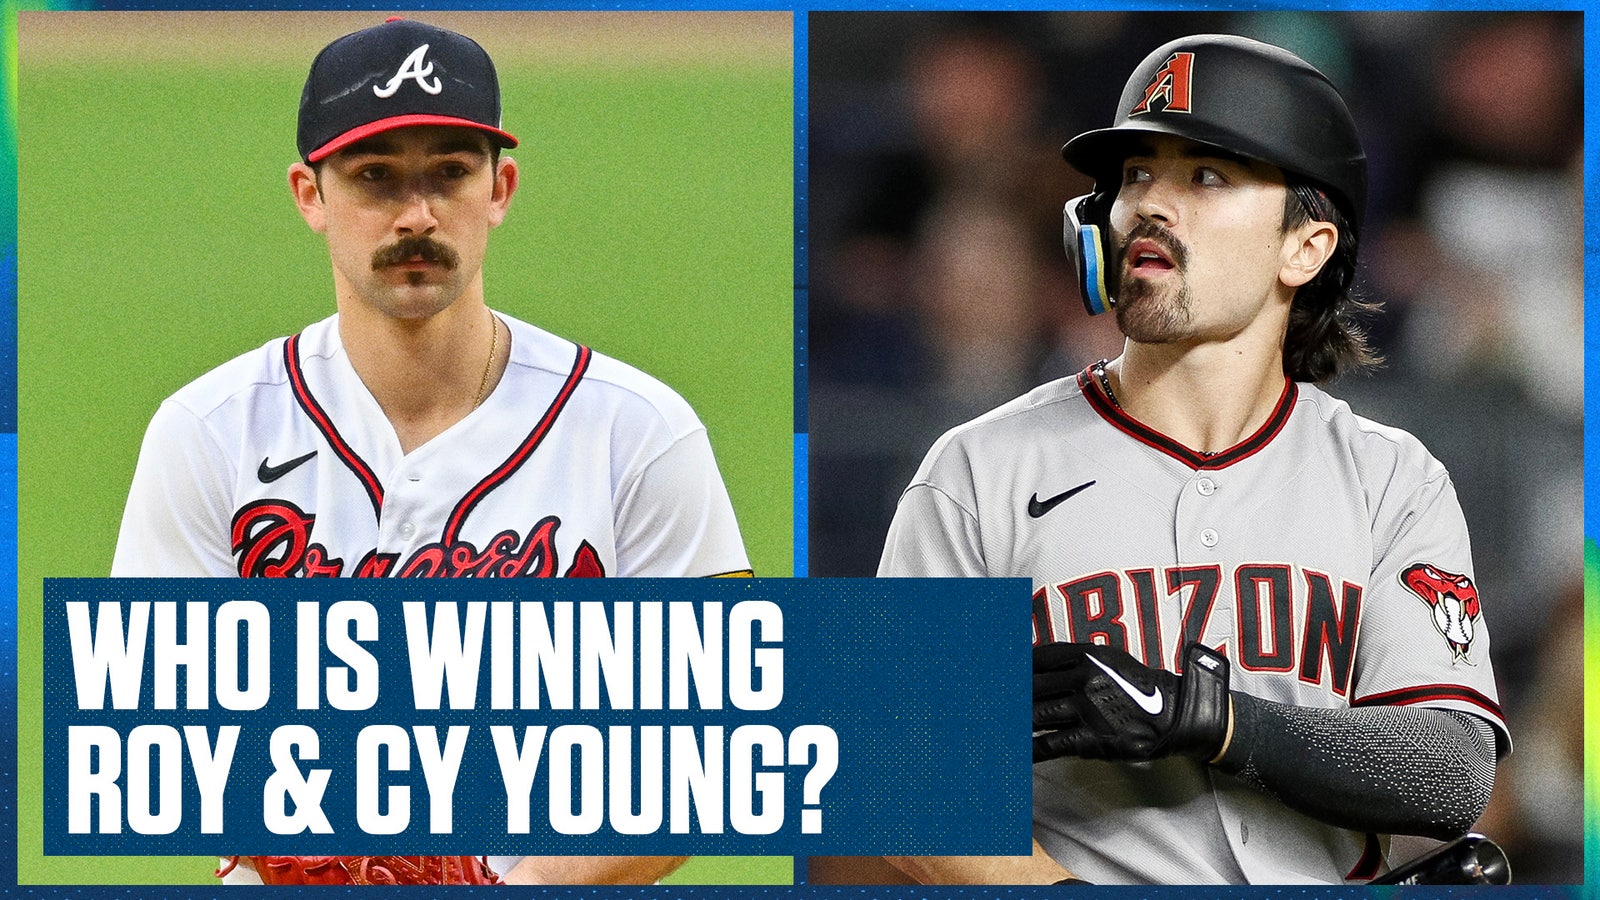 MLB Regular Season Awards: Who is taking home Rookie of the Year & Cy Young?